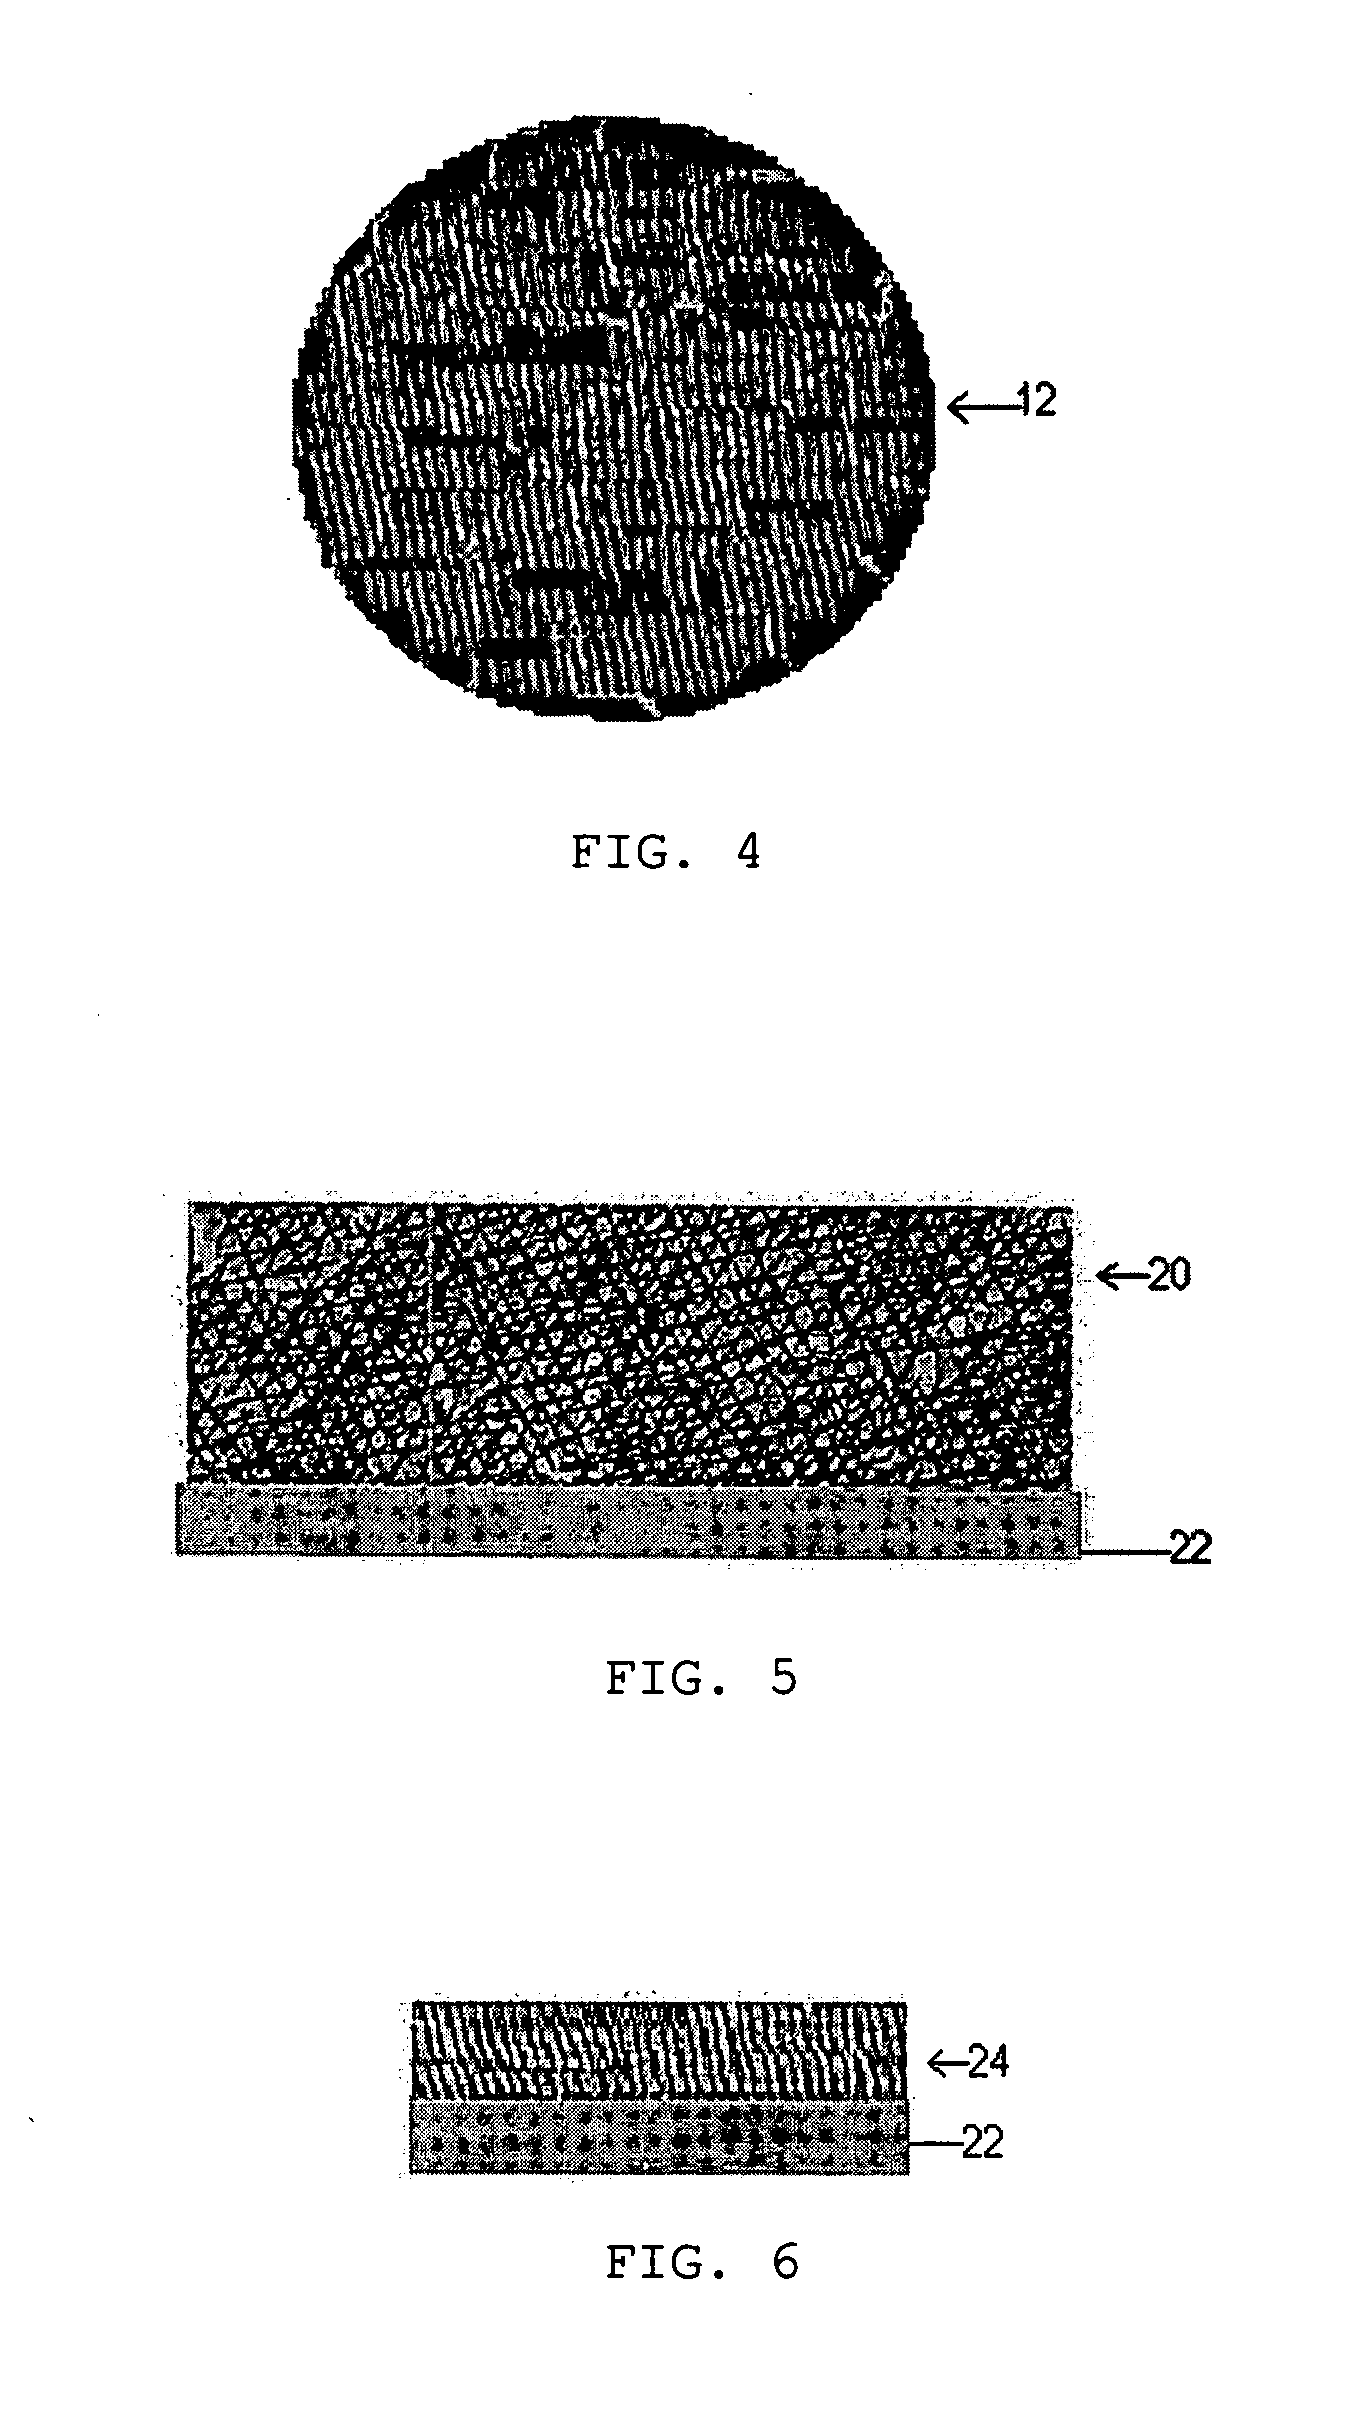 Nanostructured composite reinforced material